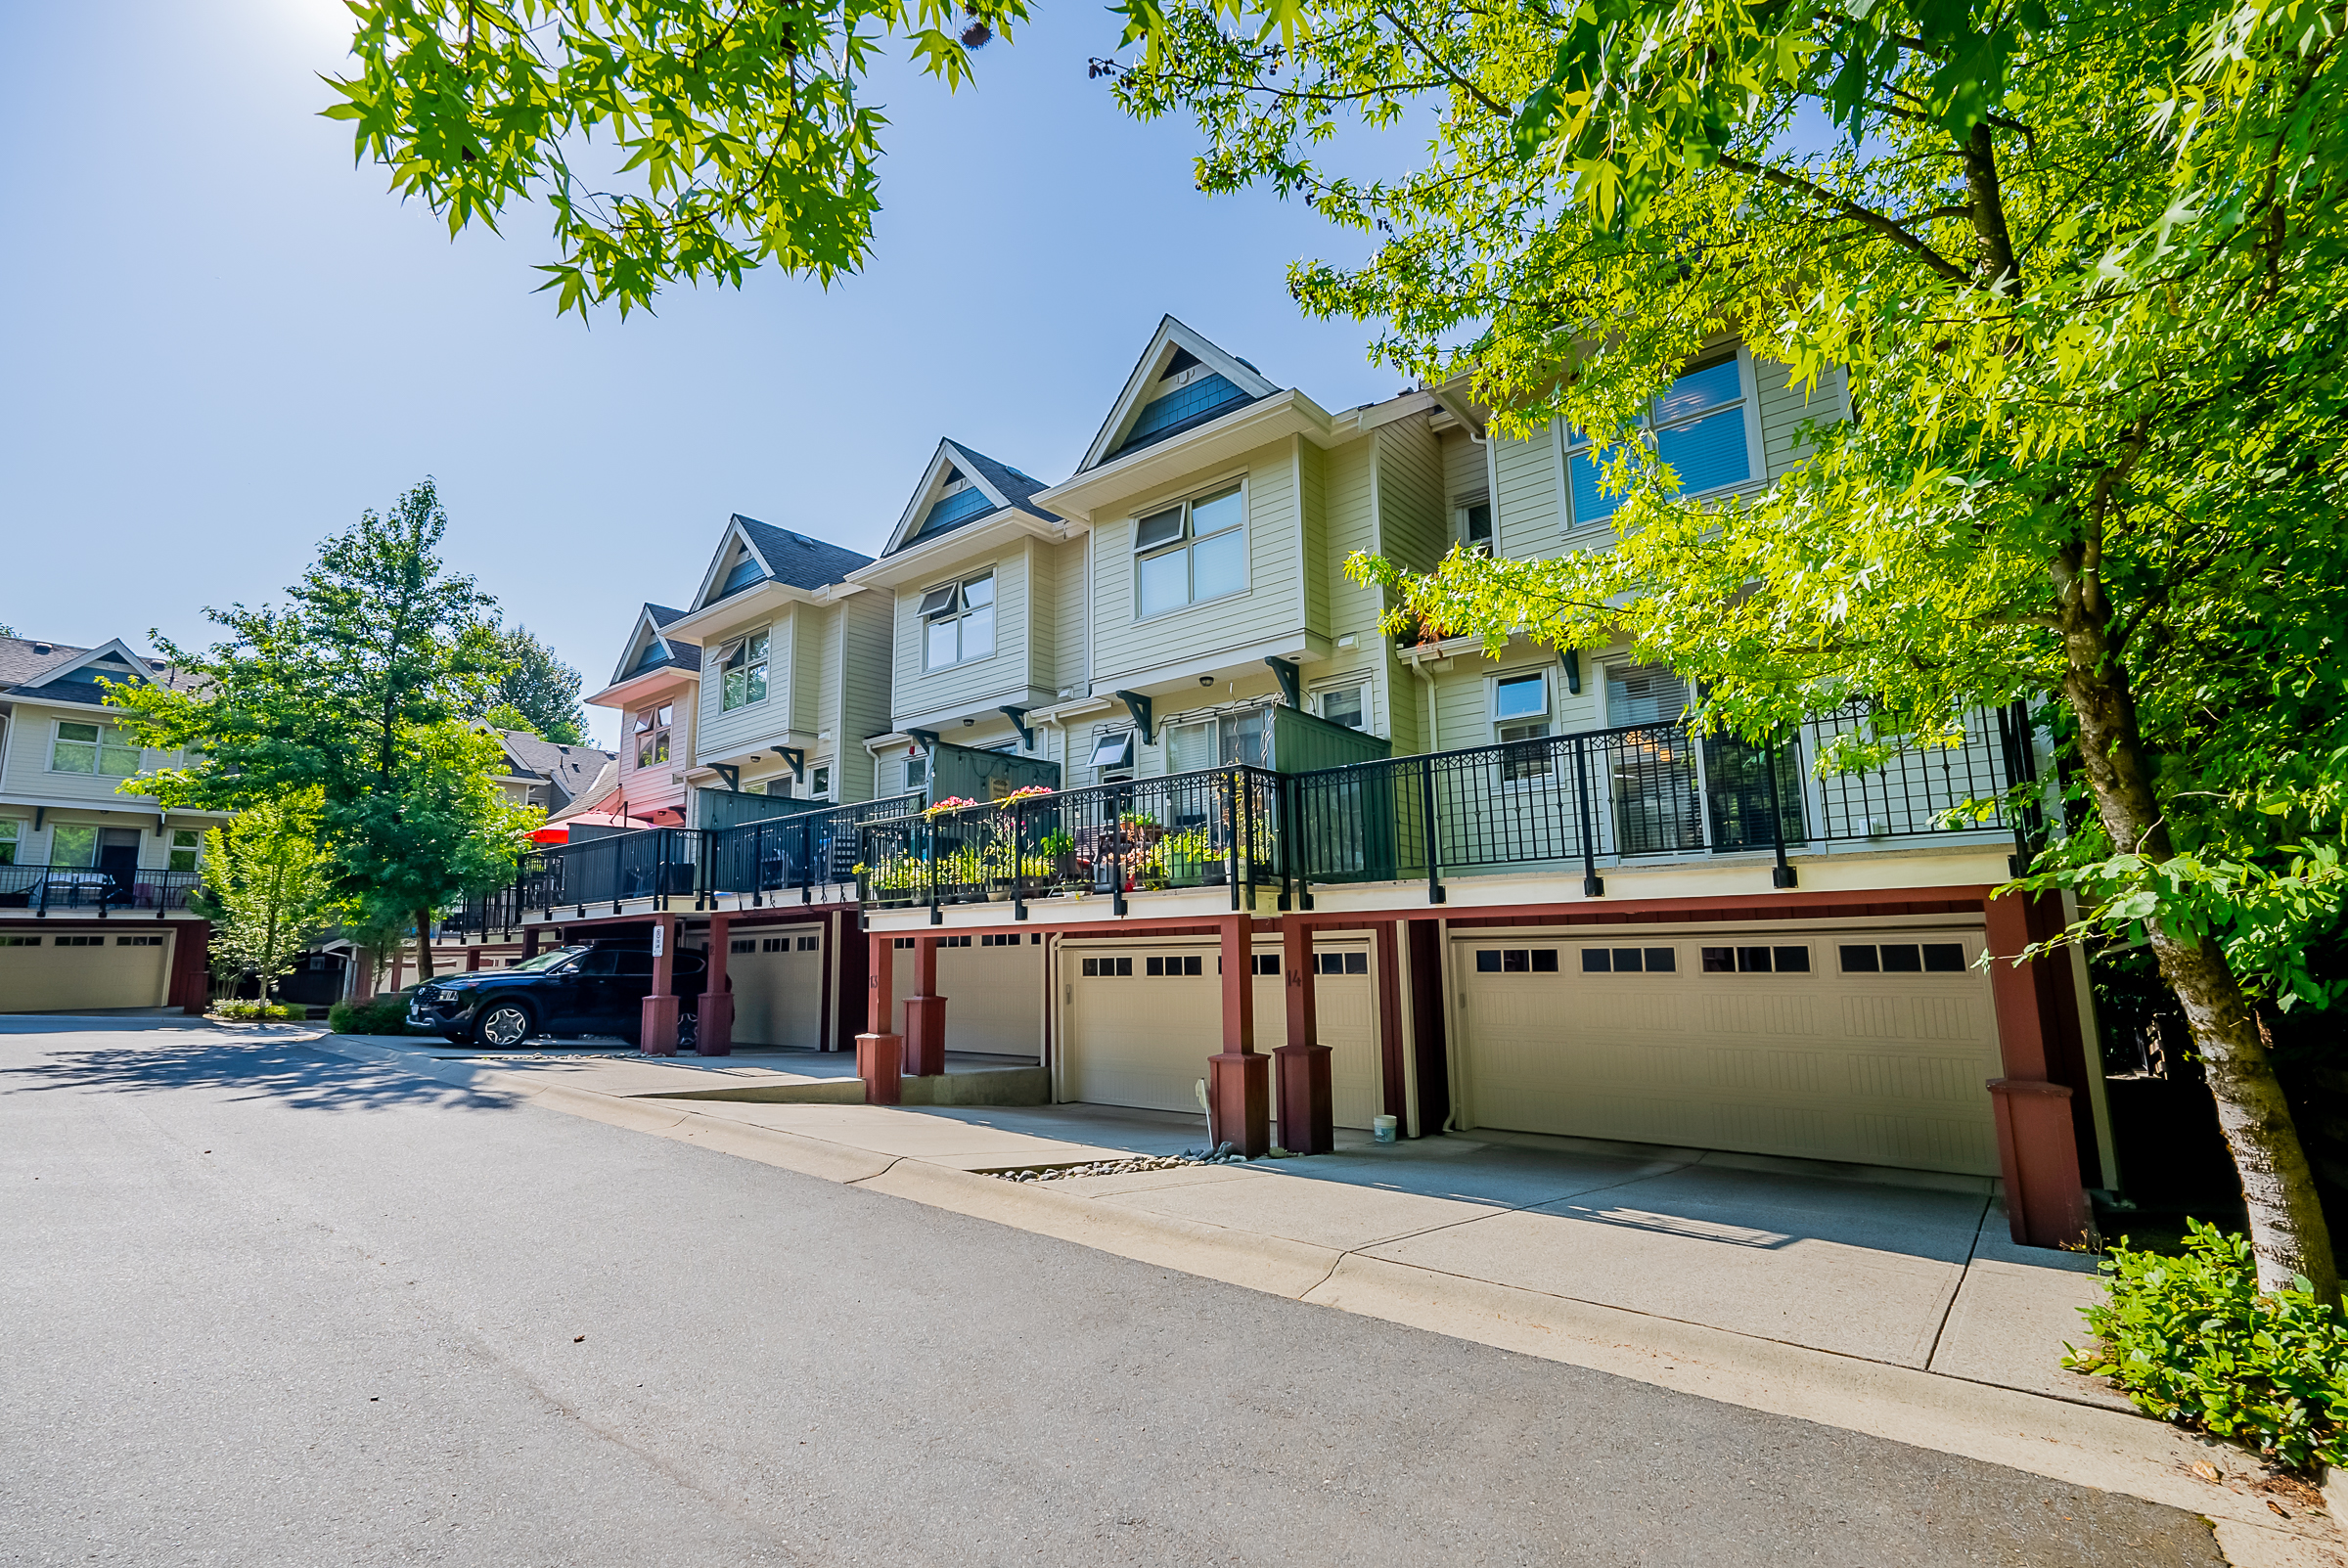 #1 Selling Burke Mountain Townhome for Sale Krista Lapp Coquitlam Realtor